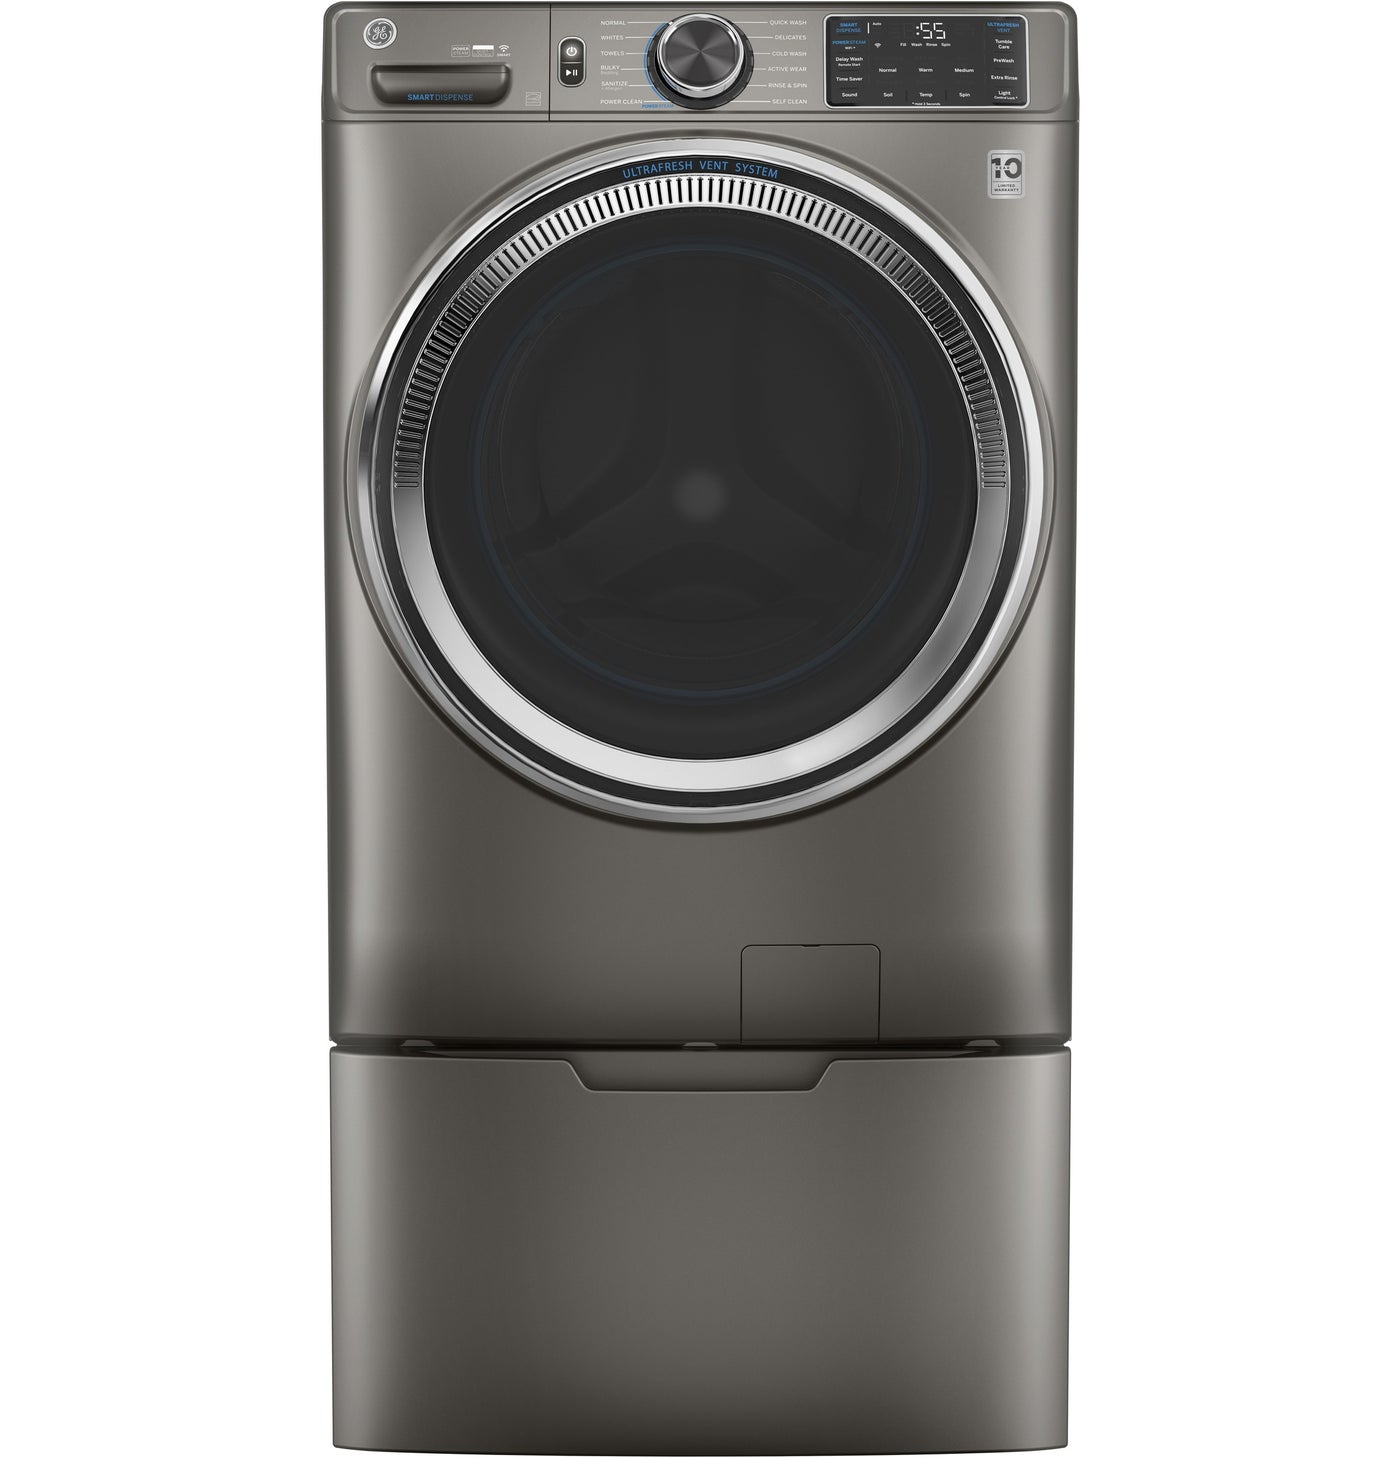 GE Satin Nickel Front Load Washer (5.5 Cu. Ft.) - GFW650SPNSN